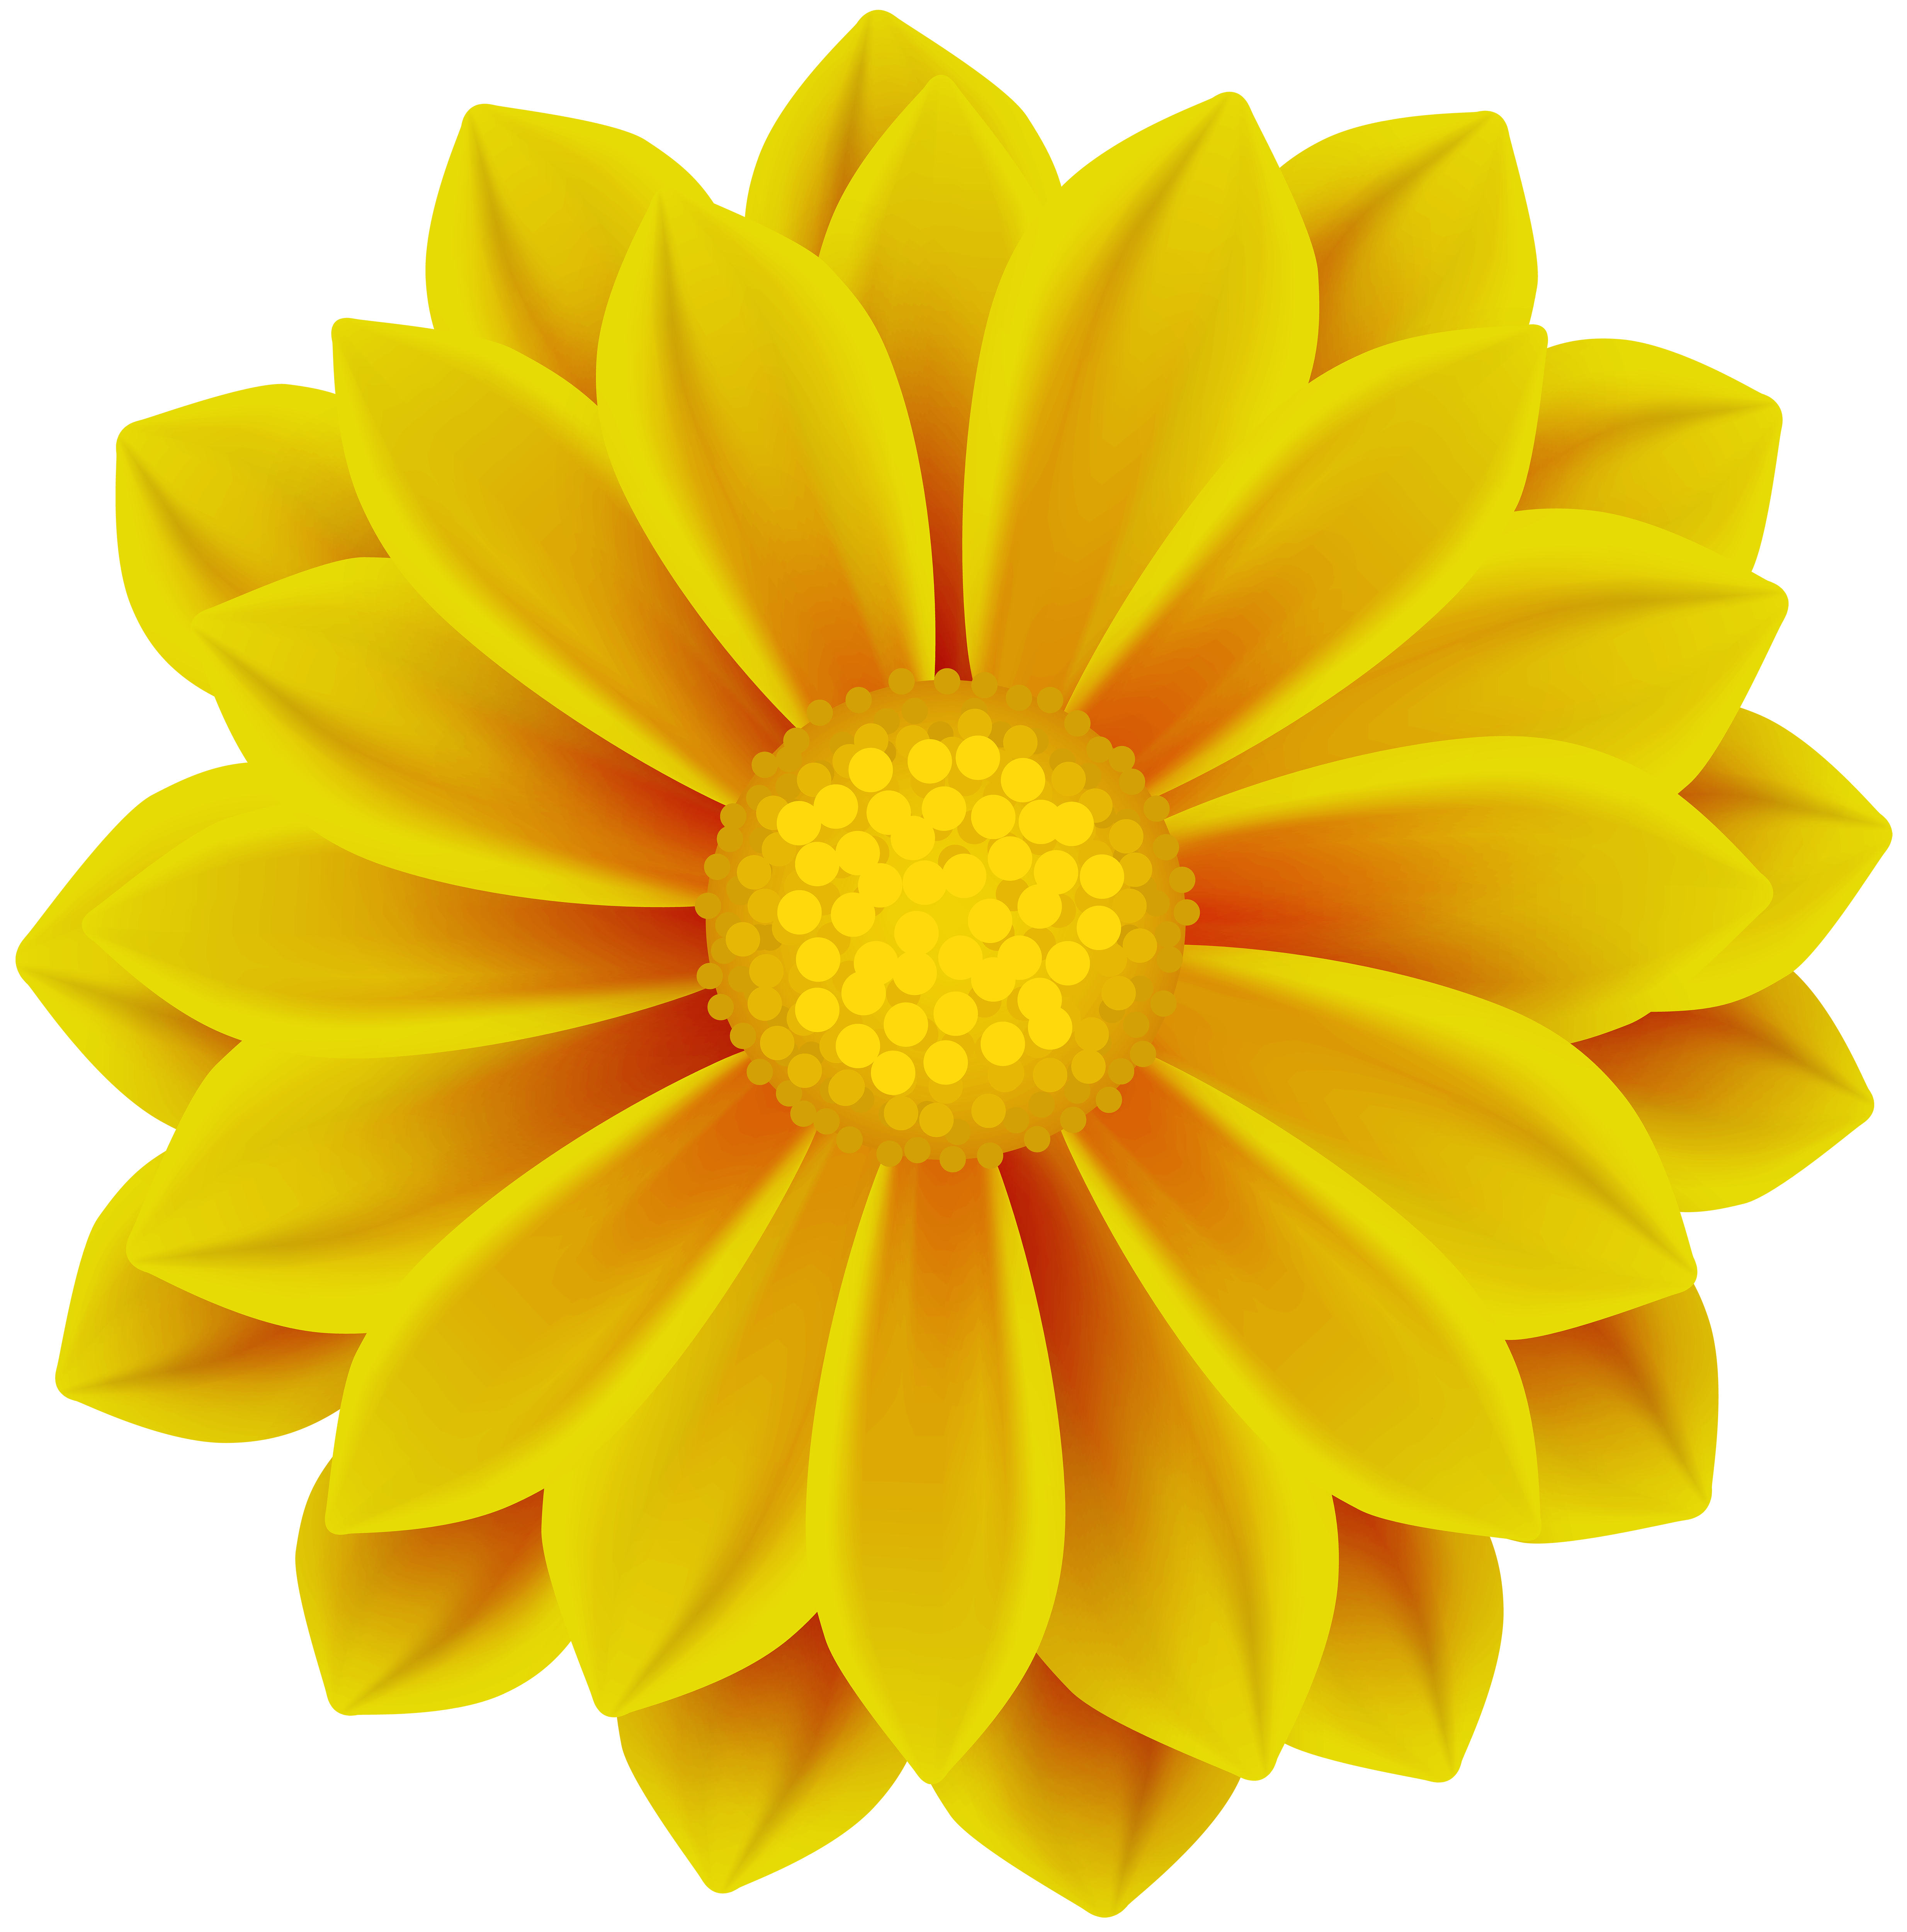 yellow flowers clipart